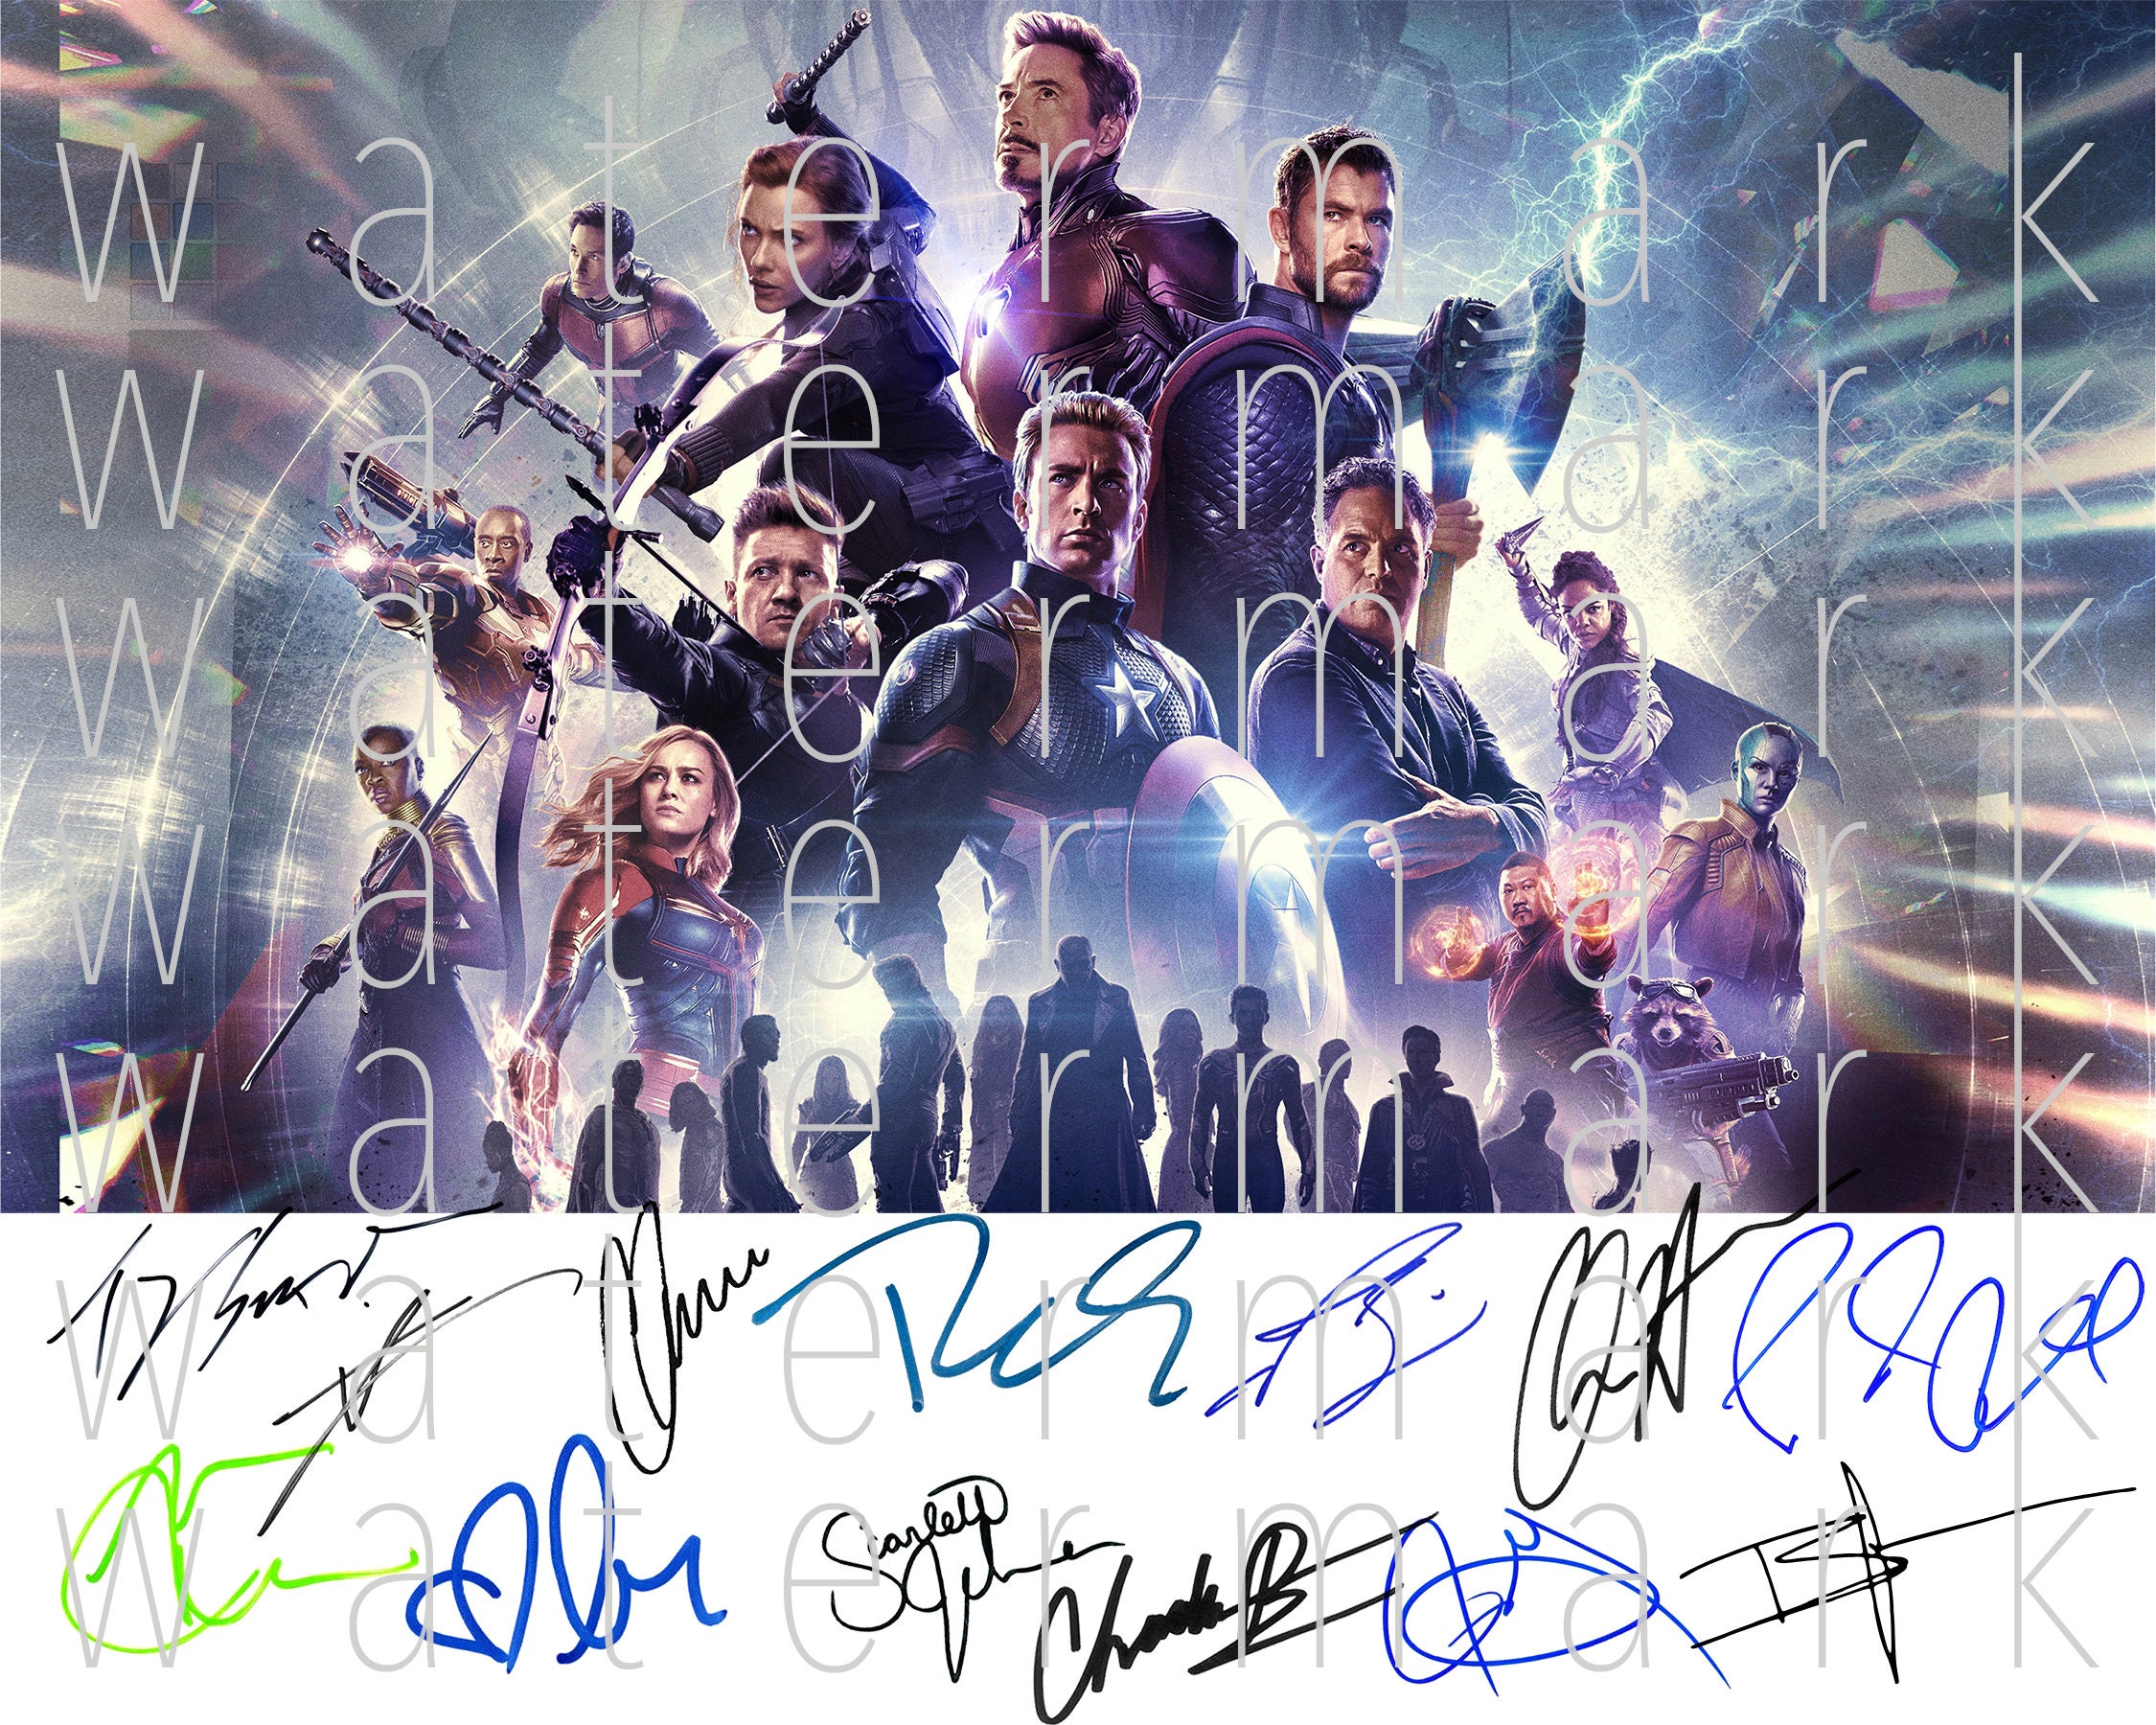 Avengers: Endgame 27x40 Original DS Theater Poster Signed By 6 Cast  Hemsworth